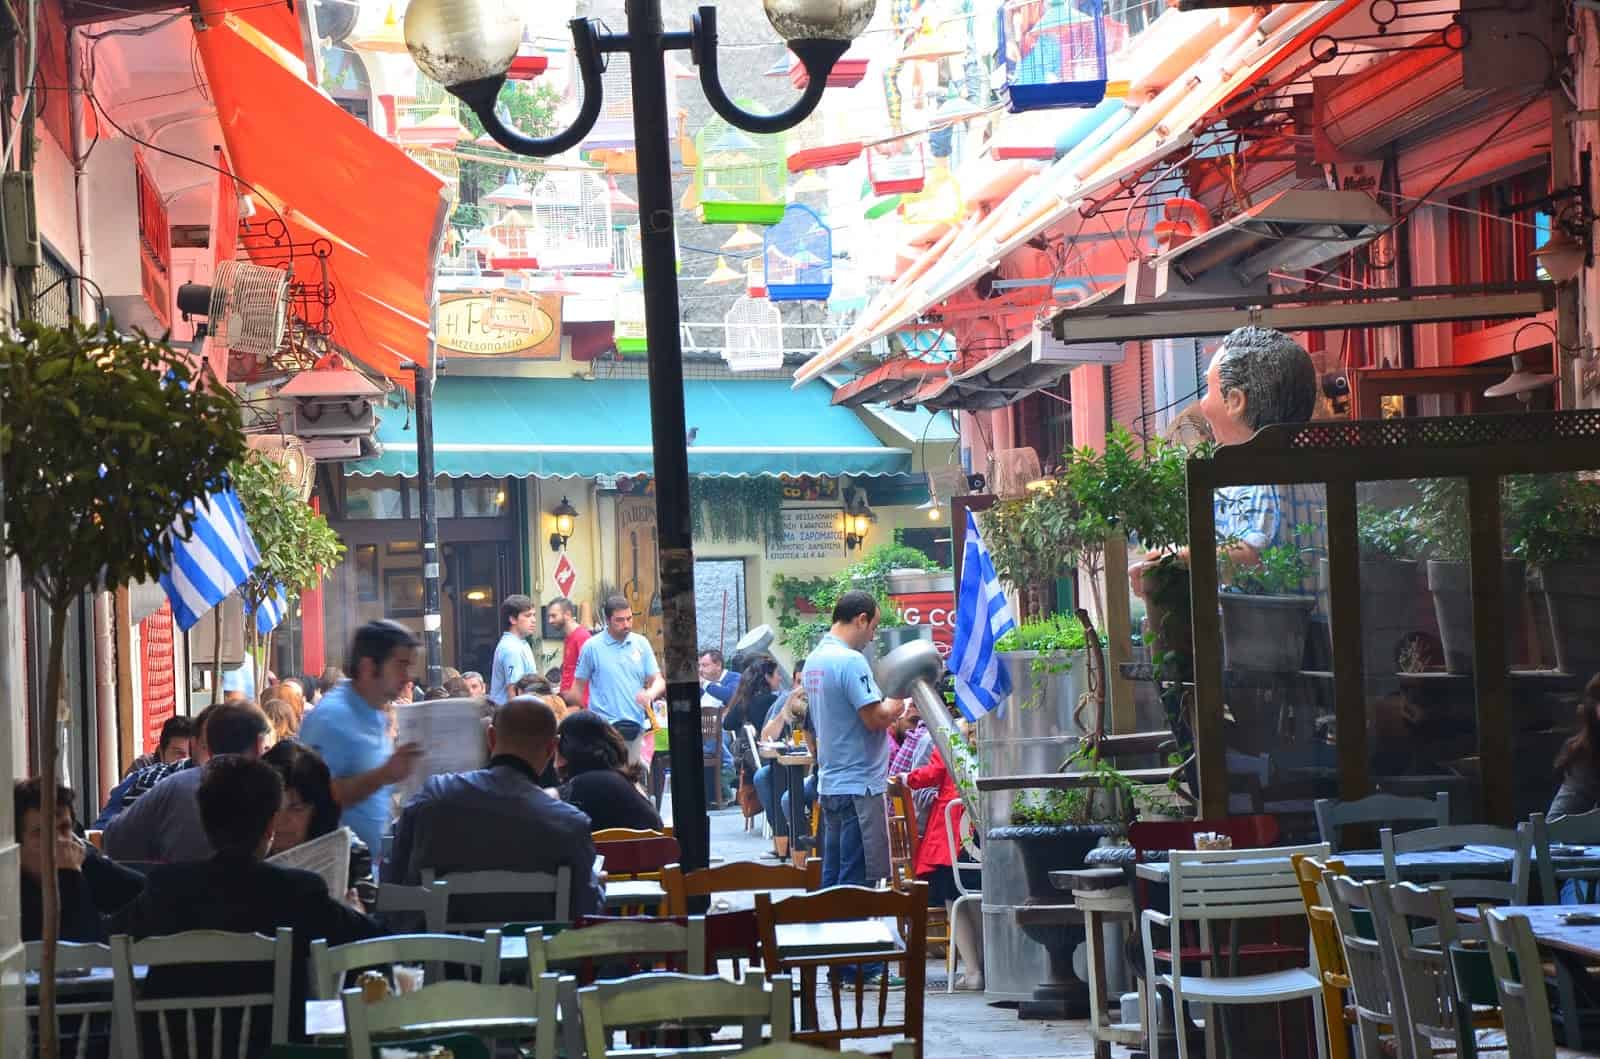 One of the many lively backstreets in Thessaloniki, Greece